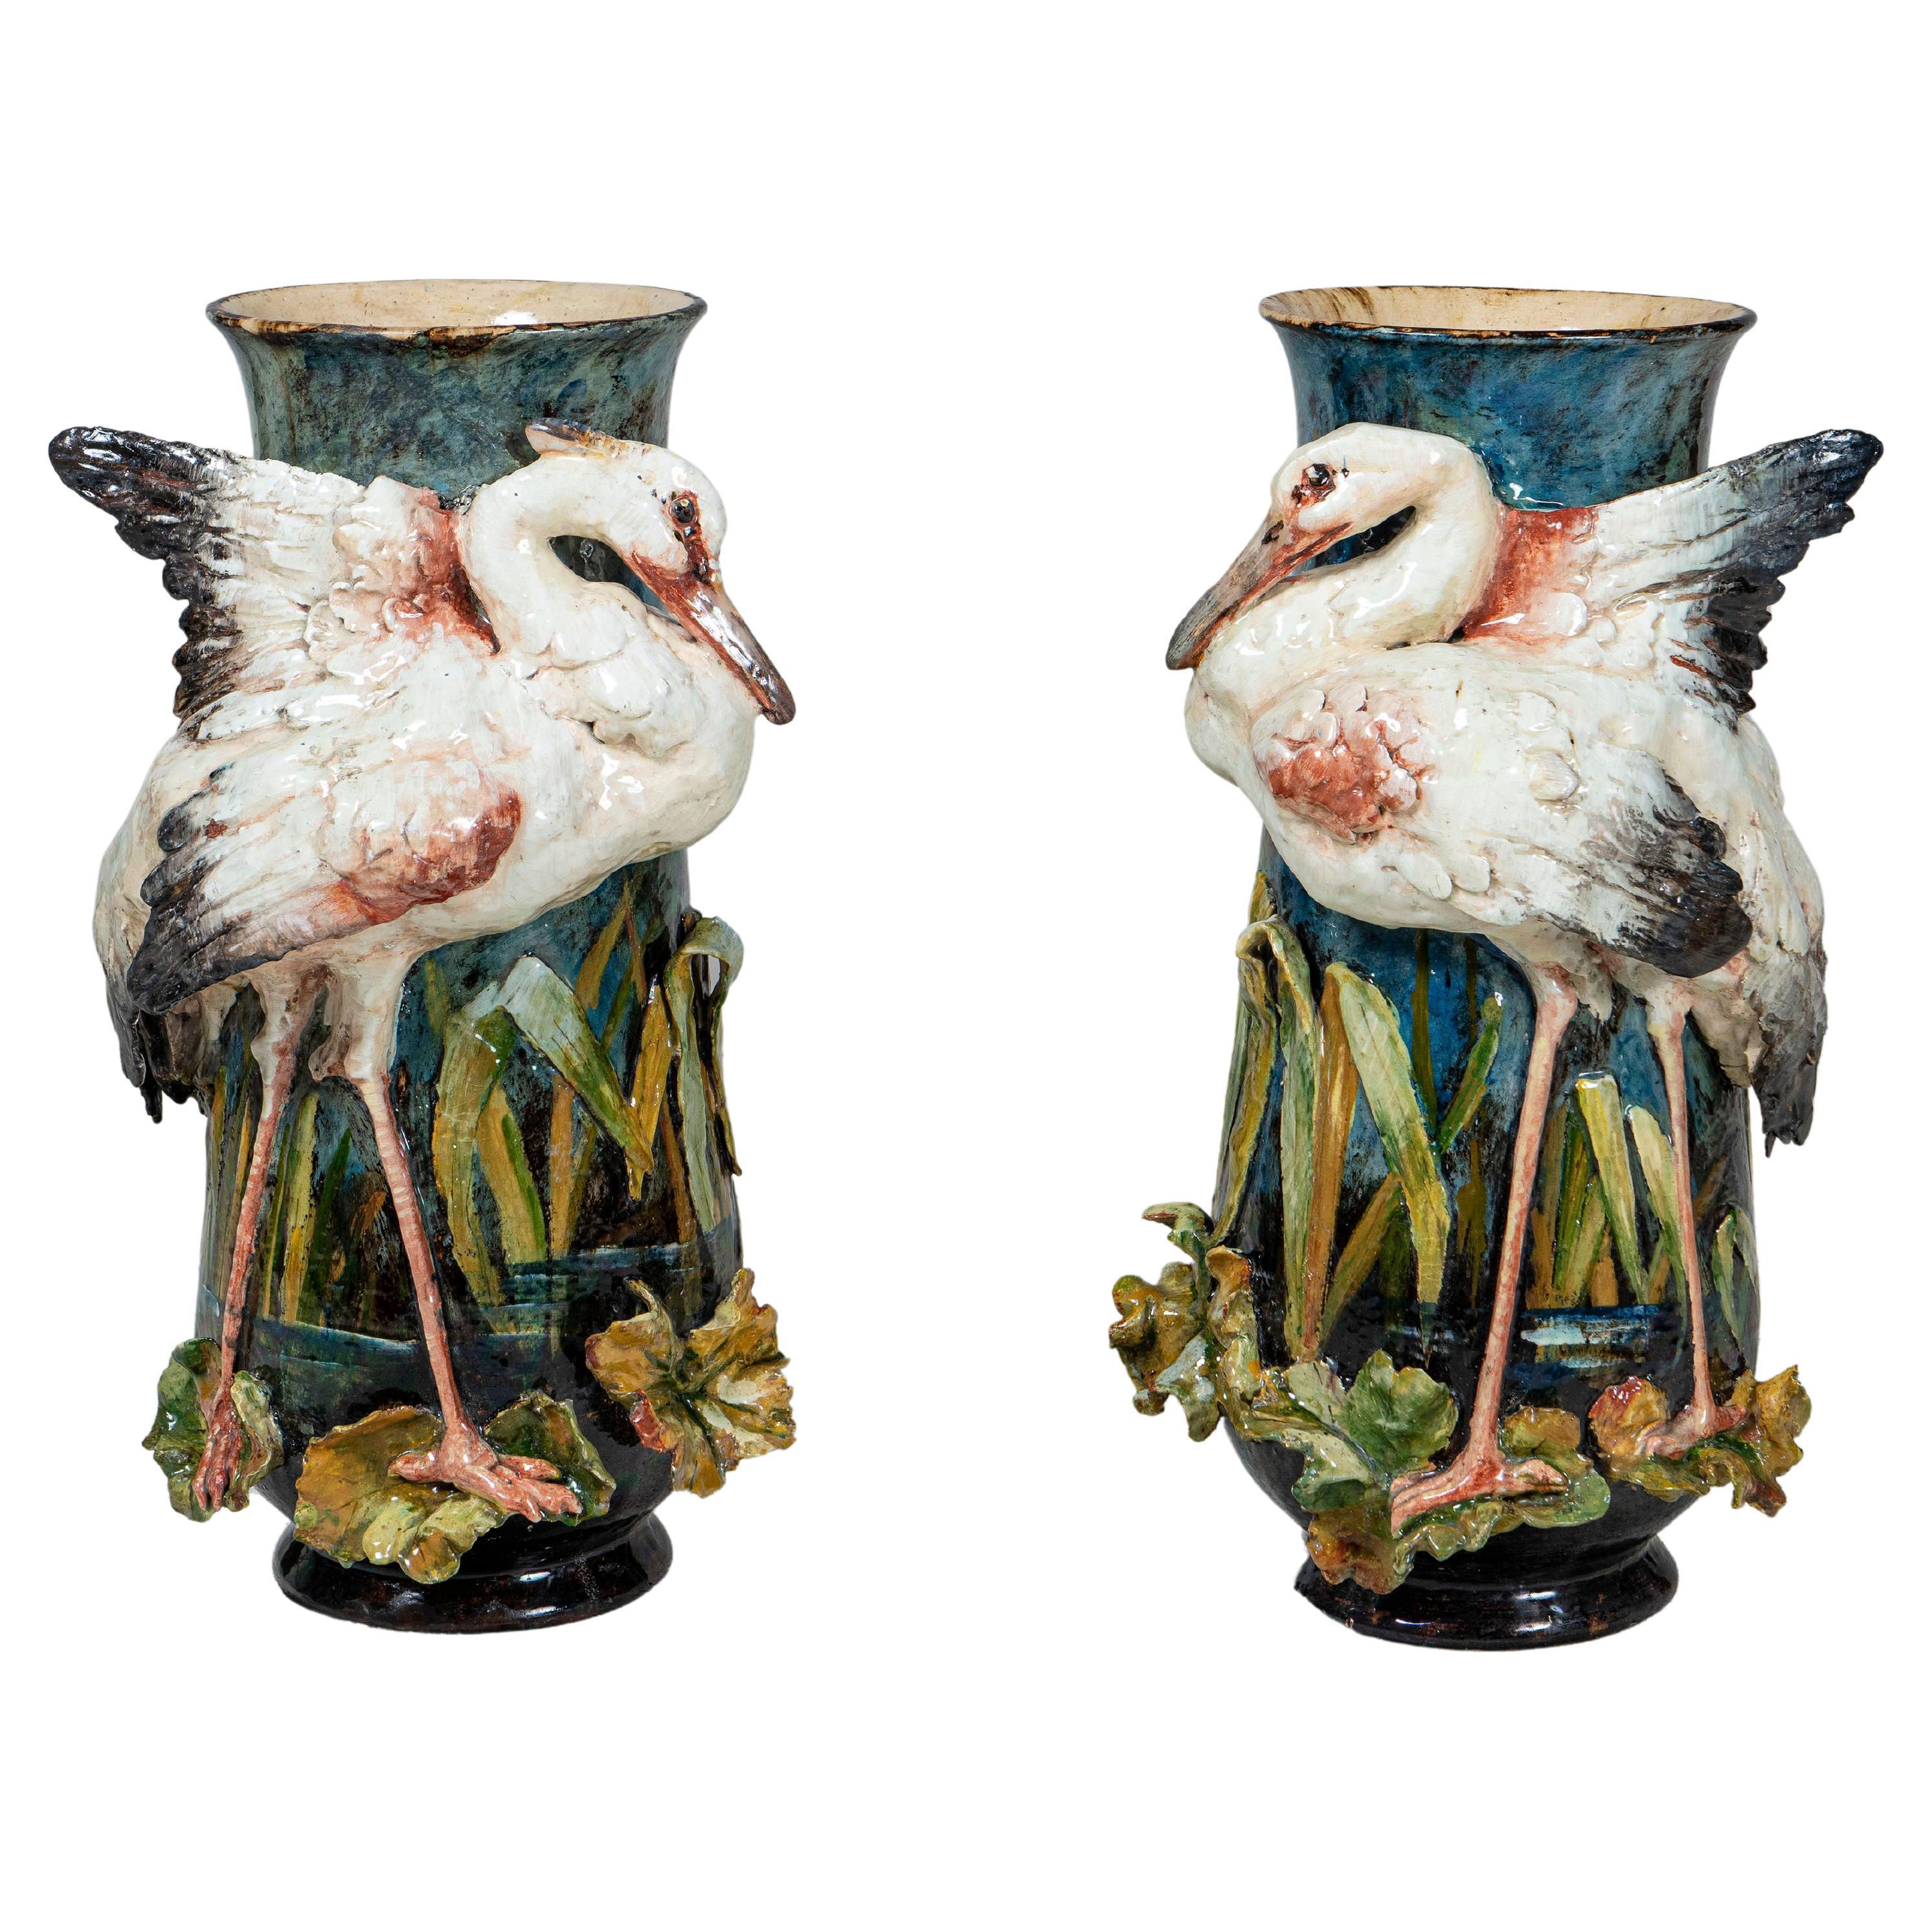 Pair of Glazed Ceramic Barbotine Vases with Heron and Flowers, France, C. 1890 For Sale